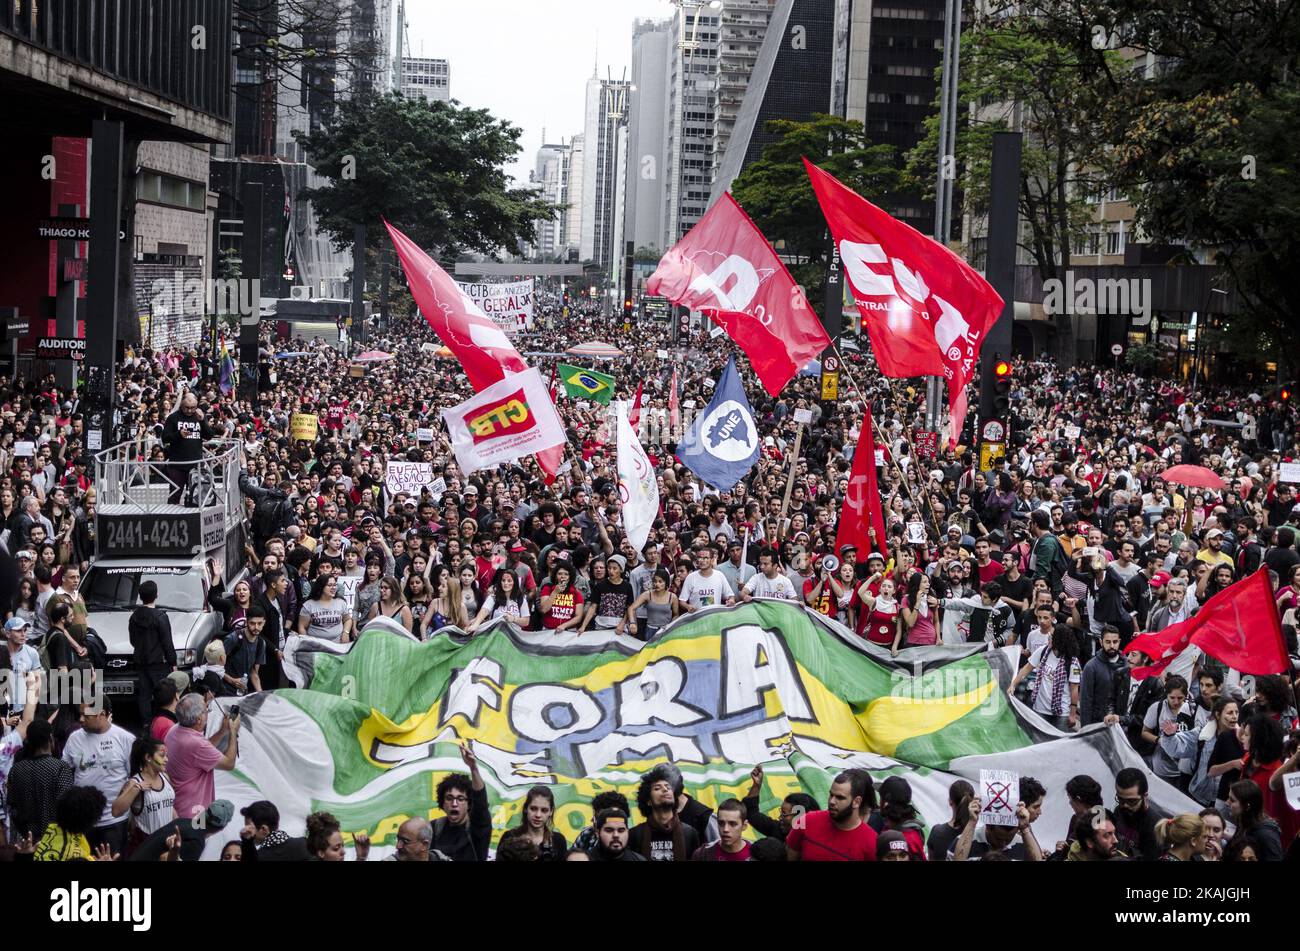 Massive demonstration against the presidency of Michel Temer is realized in Sao Paulo, Brazil on 4 September 2016. According to organizers, more than 100.000 people attended to the protest who demands Temer - who got president with the impeachment of Dilma Rousseff - to leave office by calling new direct elections on October 2nd. Michel Temer was called 'putschist' during the rally that started in Paulista avenue, downtown Sao Paulo, and finished in the west part of the city, when the police, without reason, started firing bombs, tear gas bombs and rubber bullets against demonstrators (Photo b Stock Photo